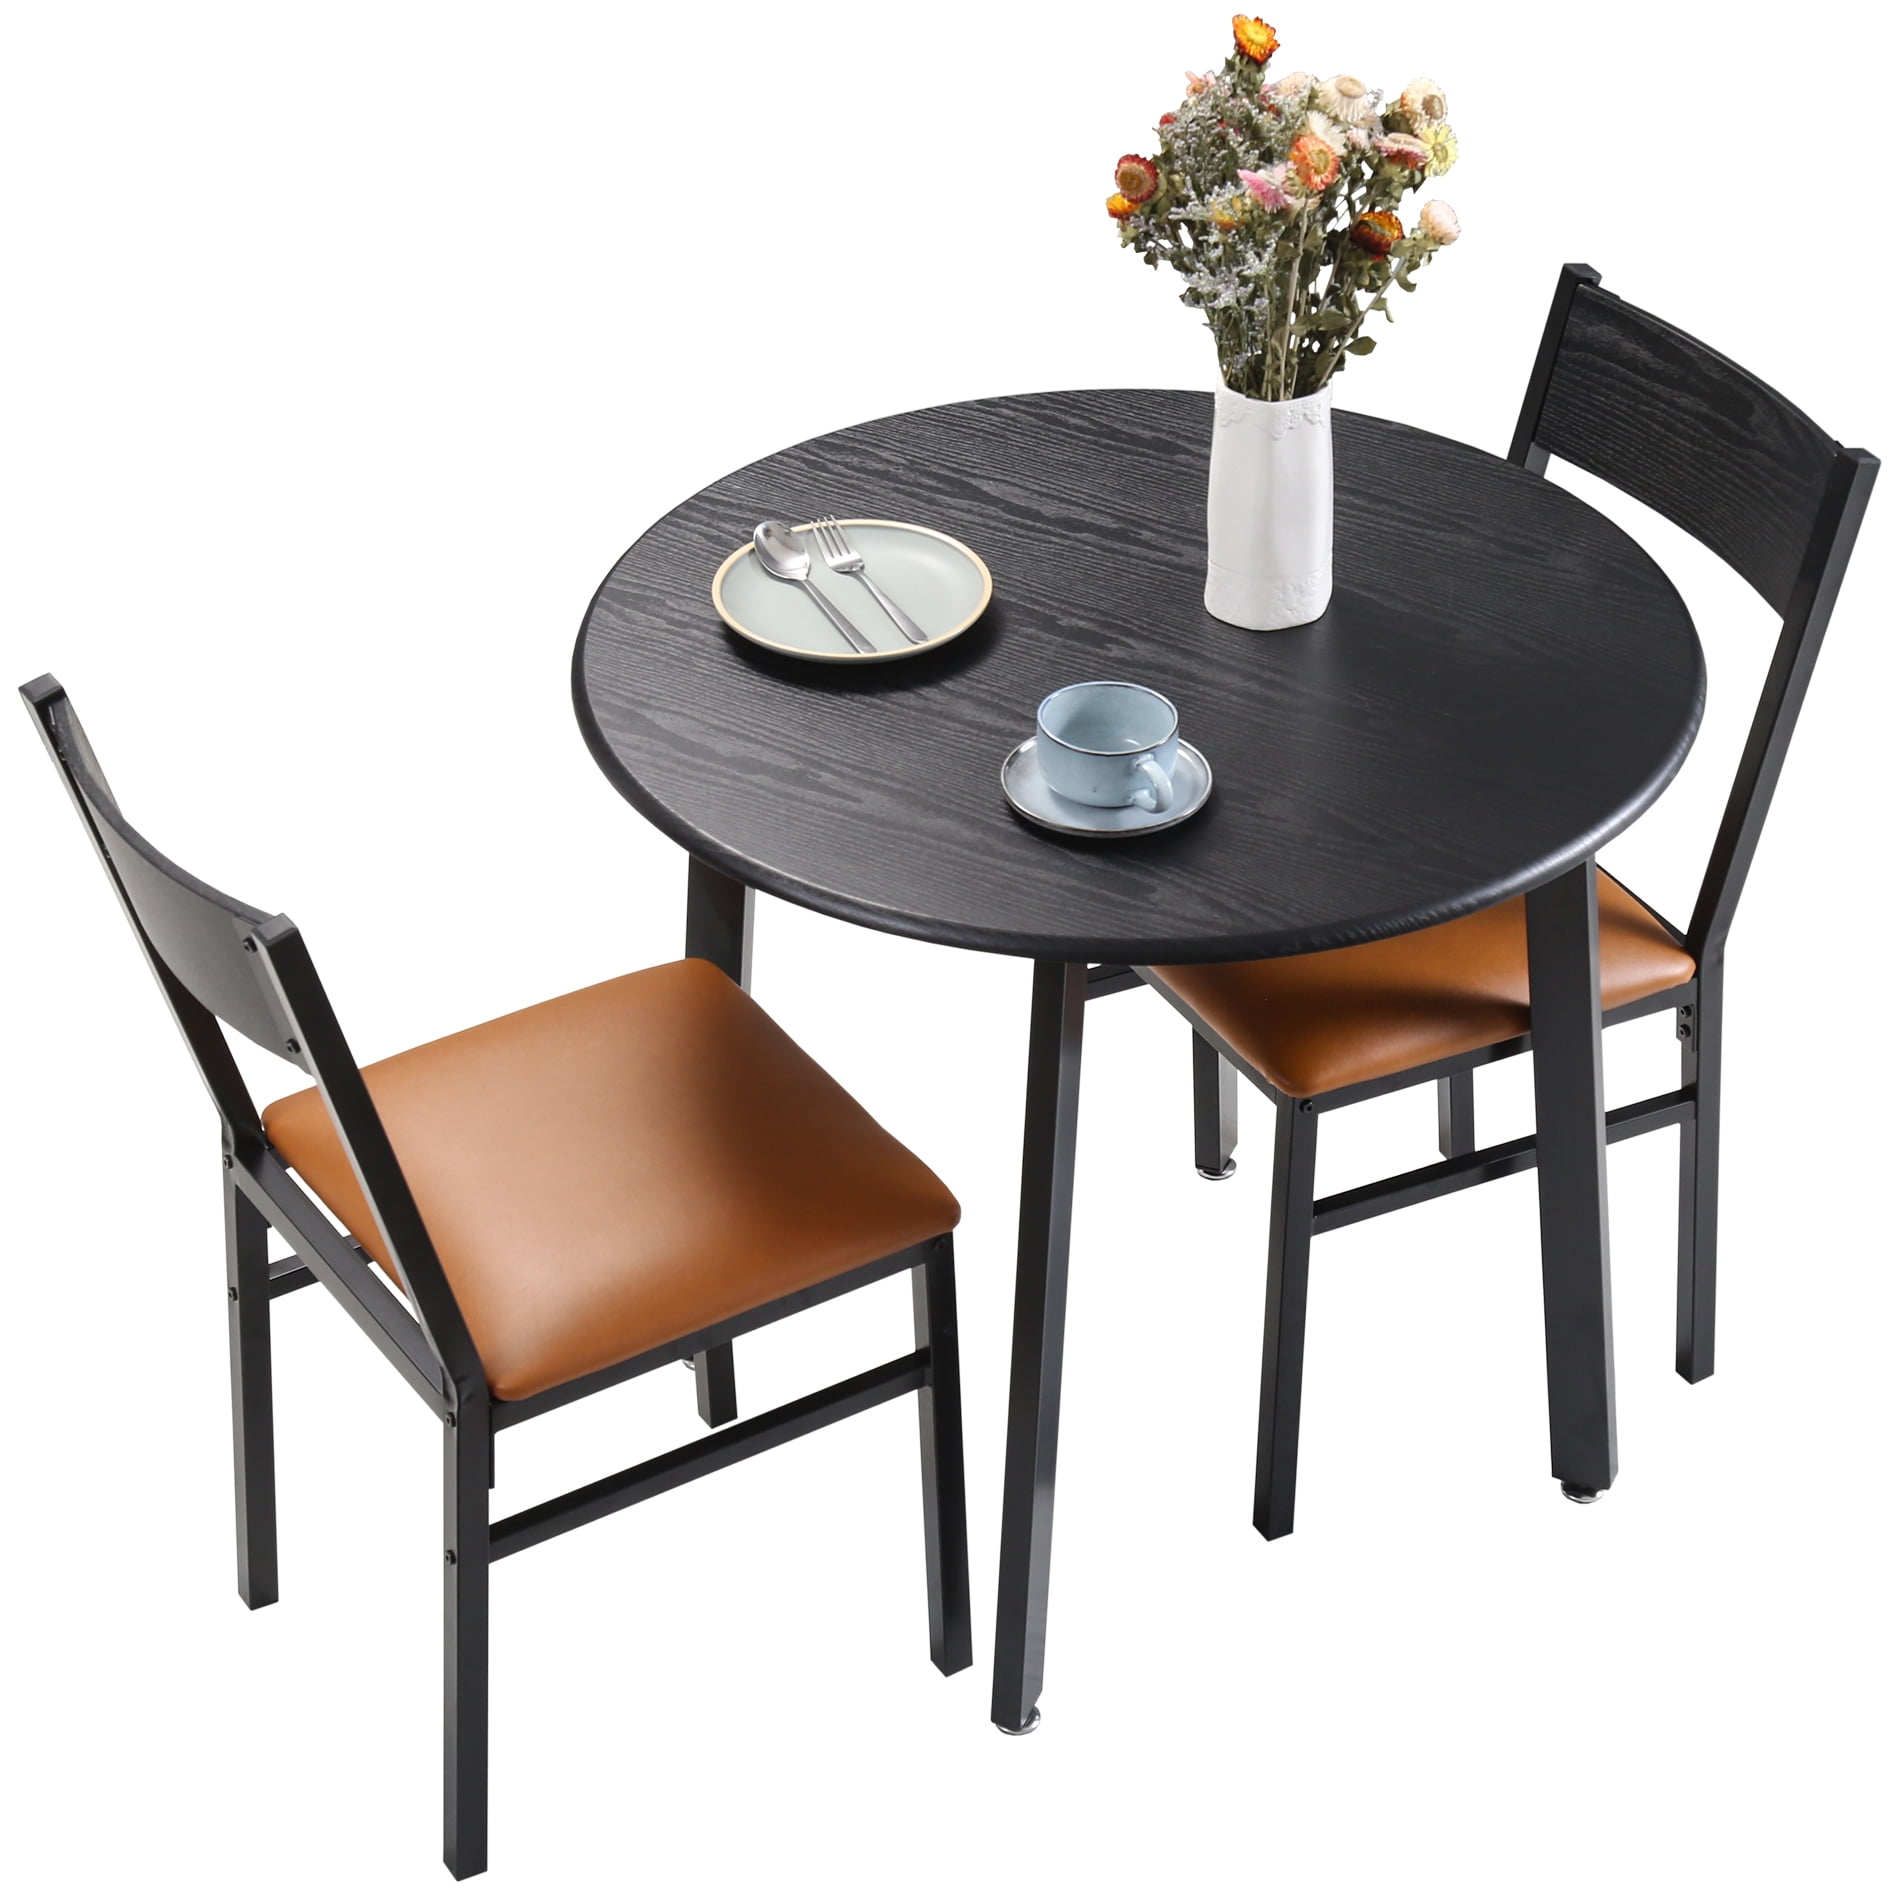 3 Piece Round Dining Table Set With, Kitchen Table And Chairs For Small Spaces